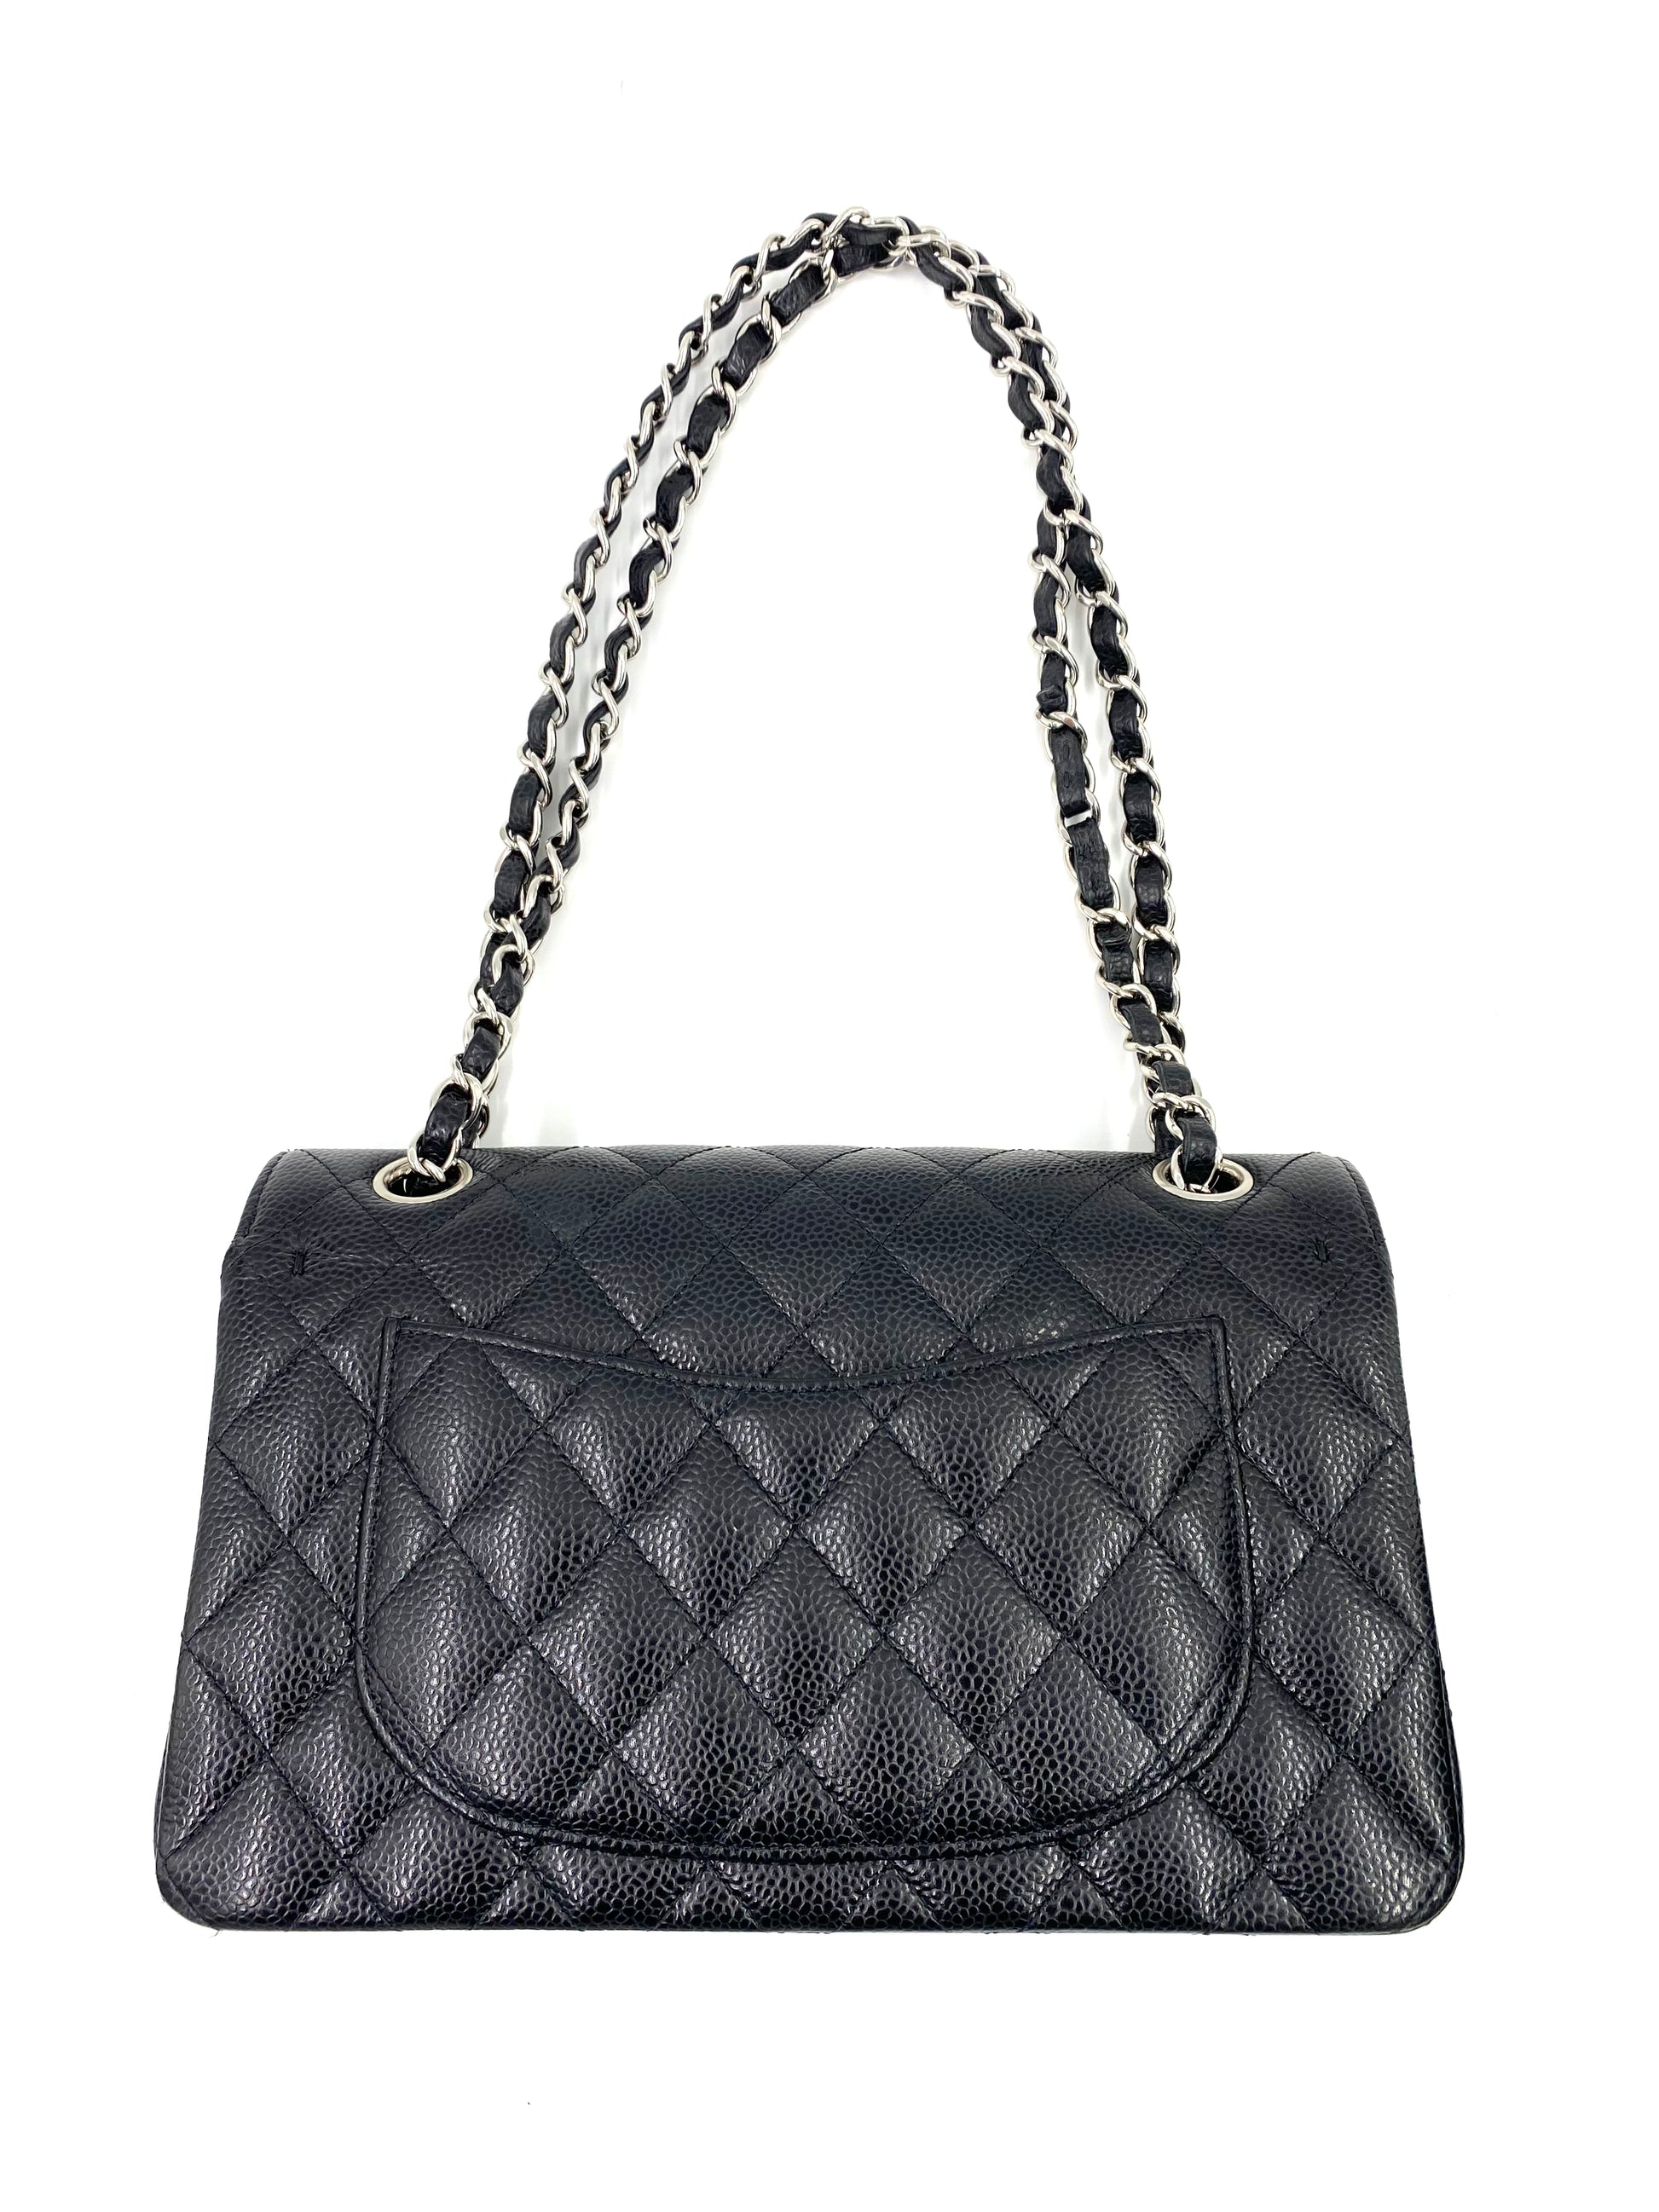 CHANEL Timeless Classic Double Flap Bag small schwarz Caviarleder